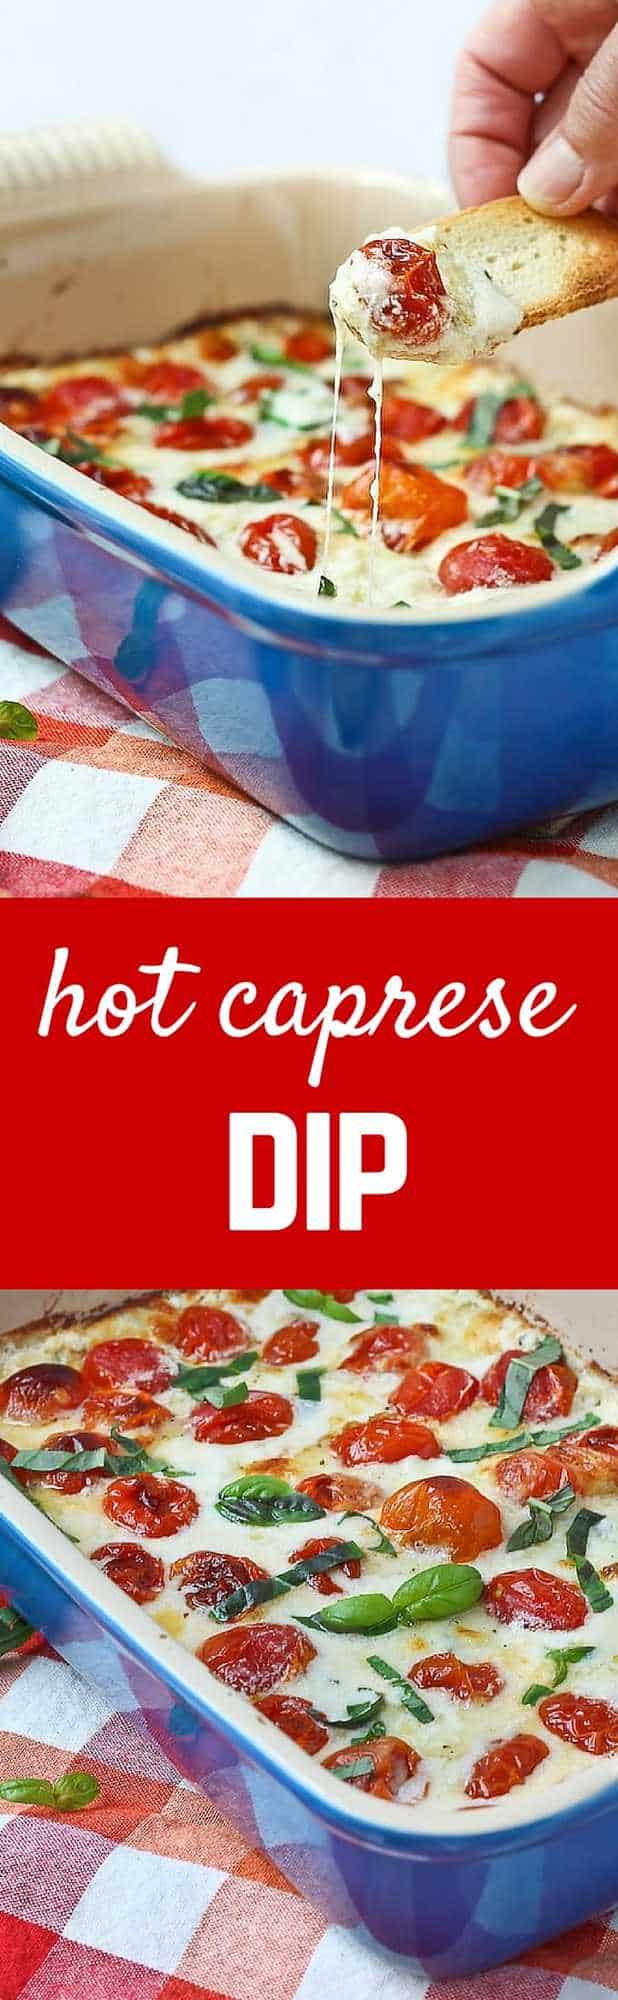 Hot Caprese Dip Recipe - You won't be able to stop going back for another bite of this addicting dip! Get the easy recipe on RachelCooks.com!